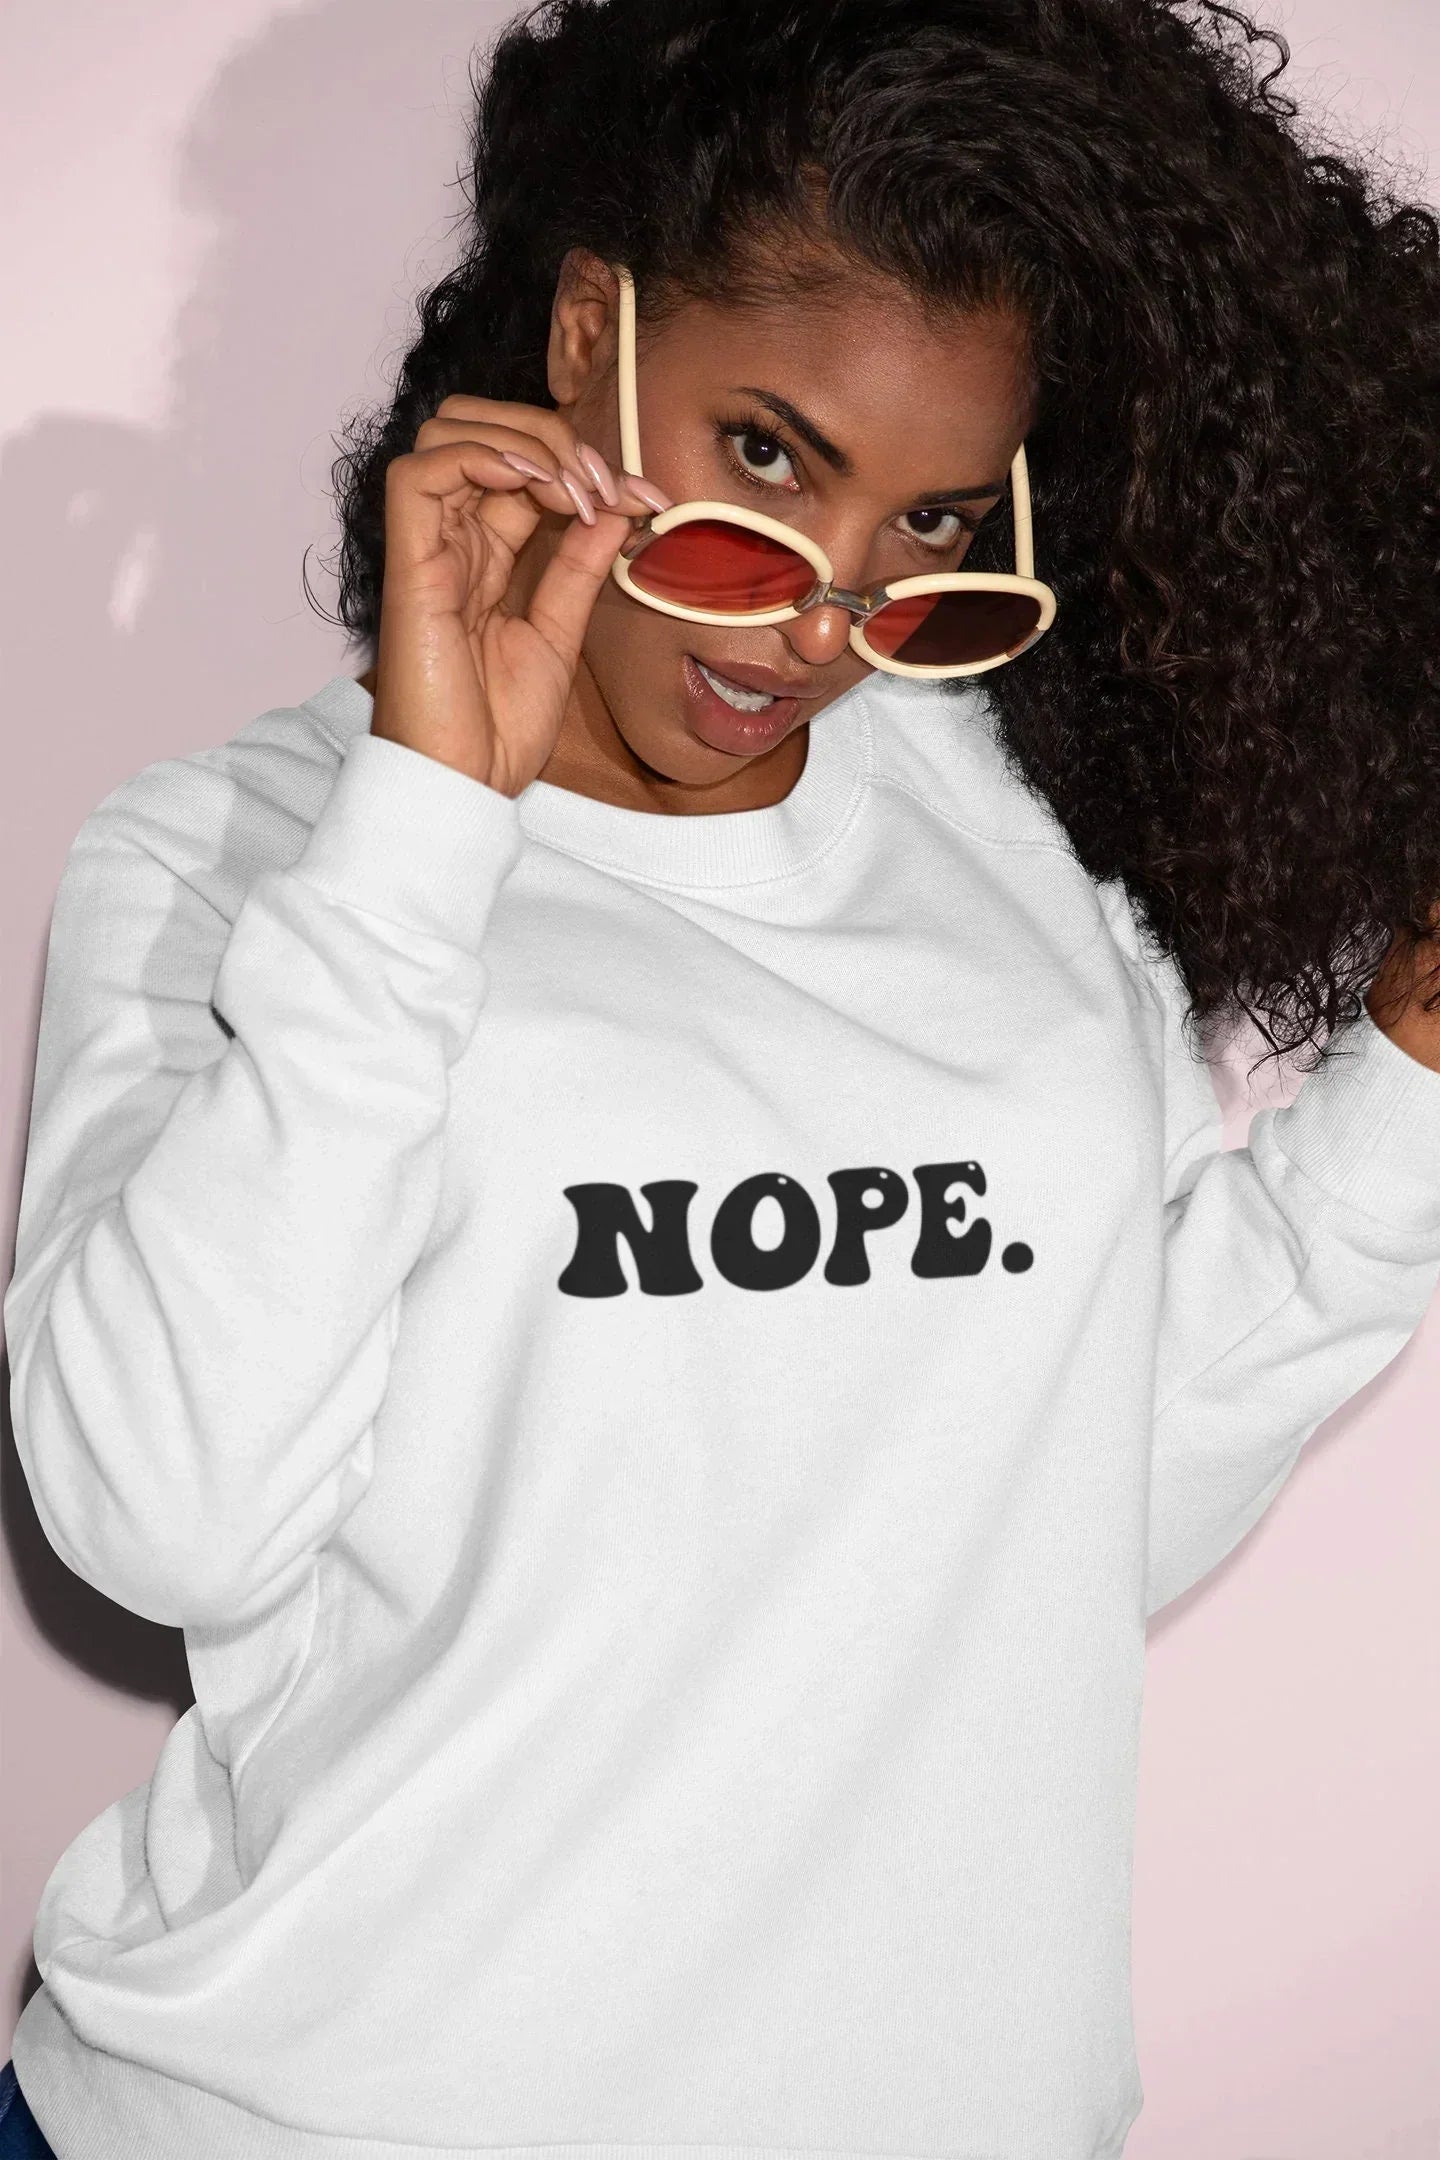 Nope Retro Shirt, Funny Sweatshirt, Cute Sassy Gift, Funny Graphic Longsleeve Tee, Funny Hoodie, Gift For Her, Sarcastic Sweater